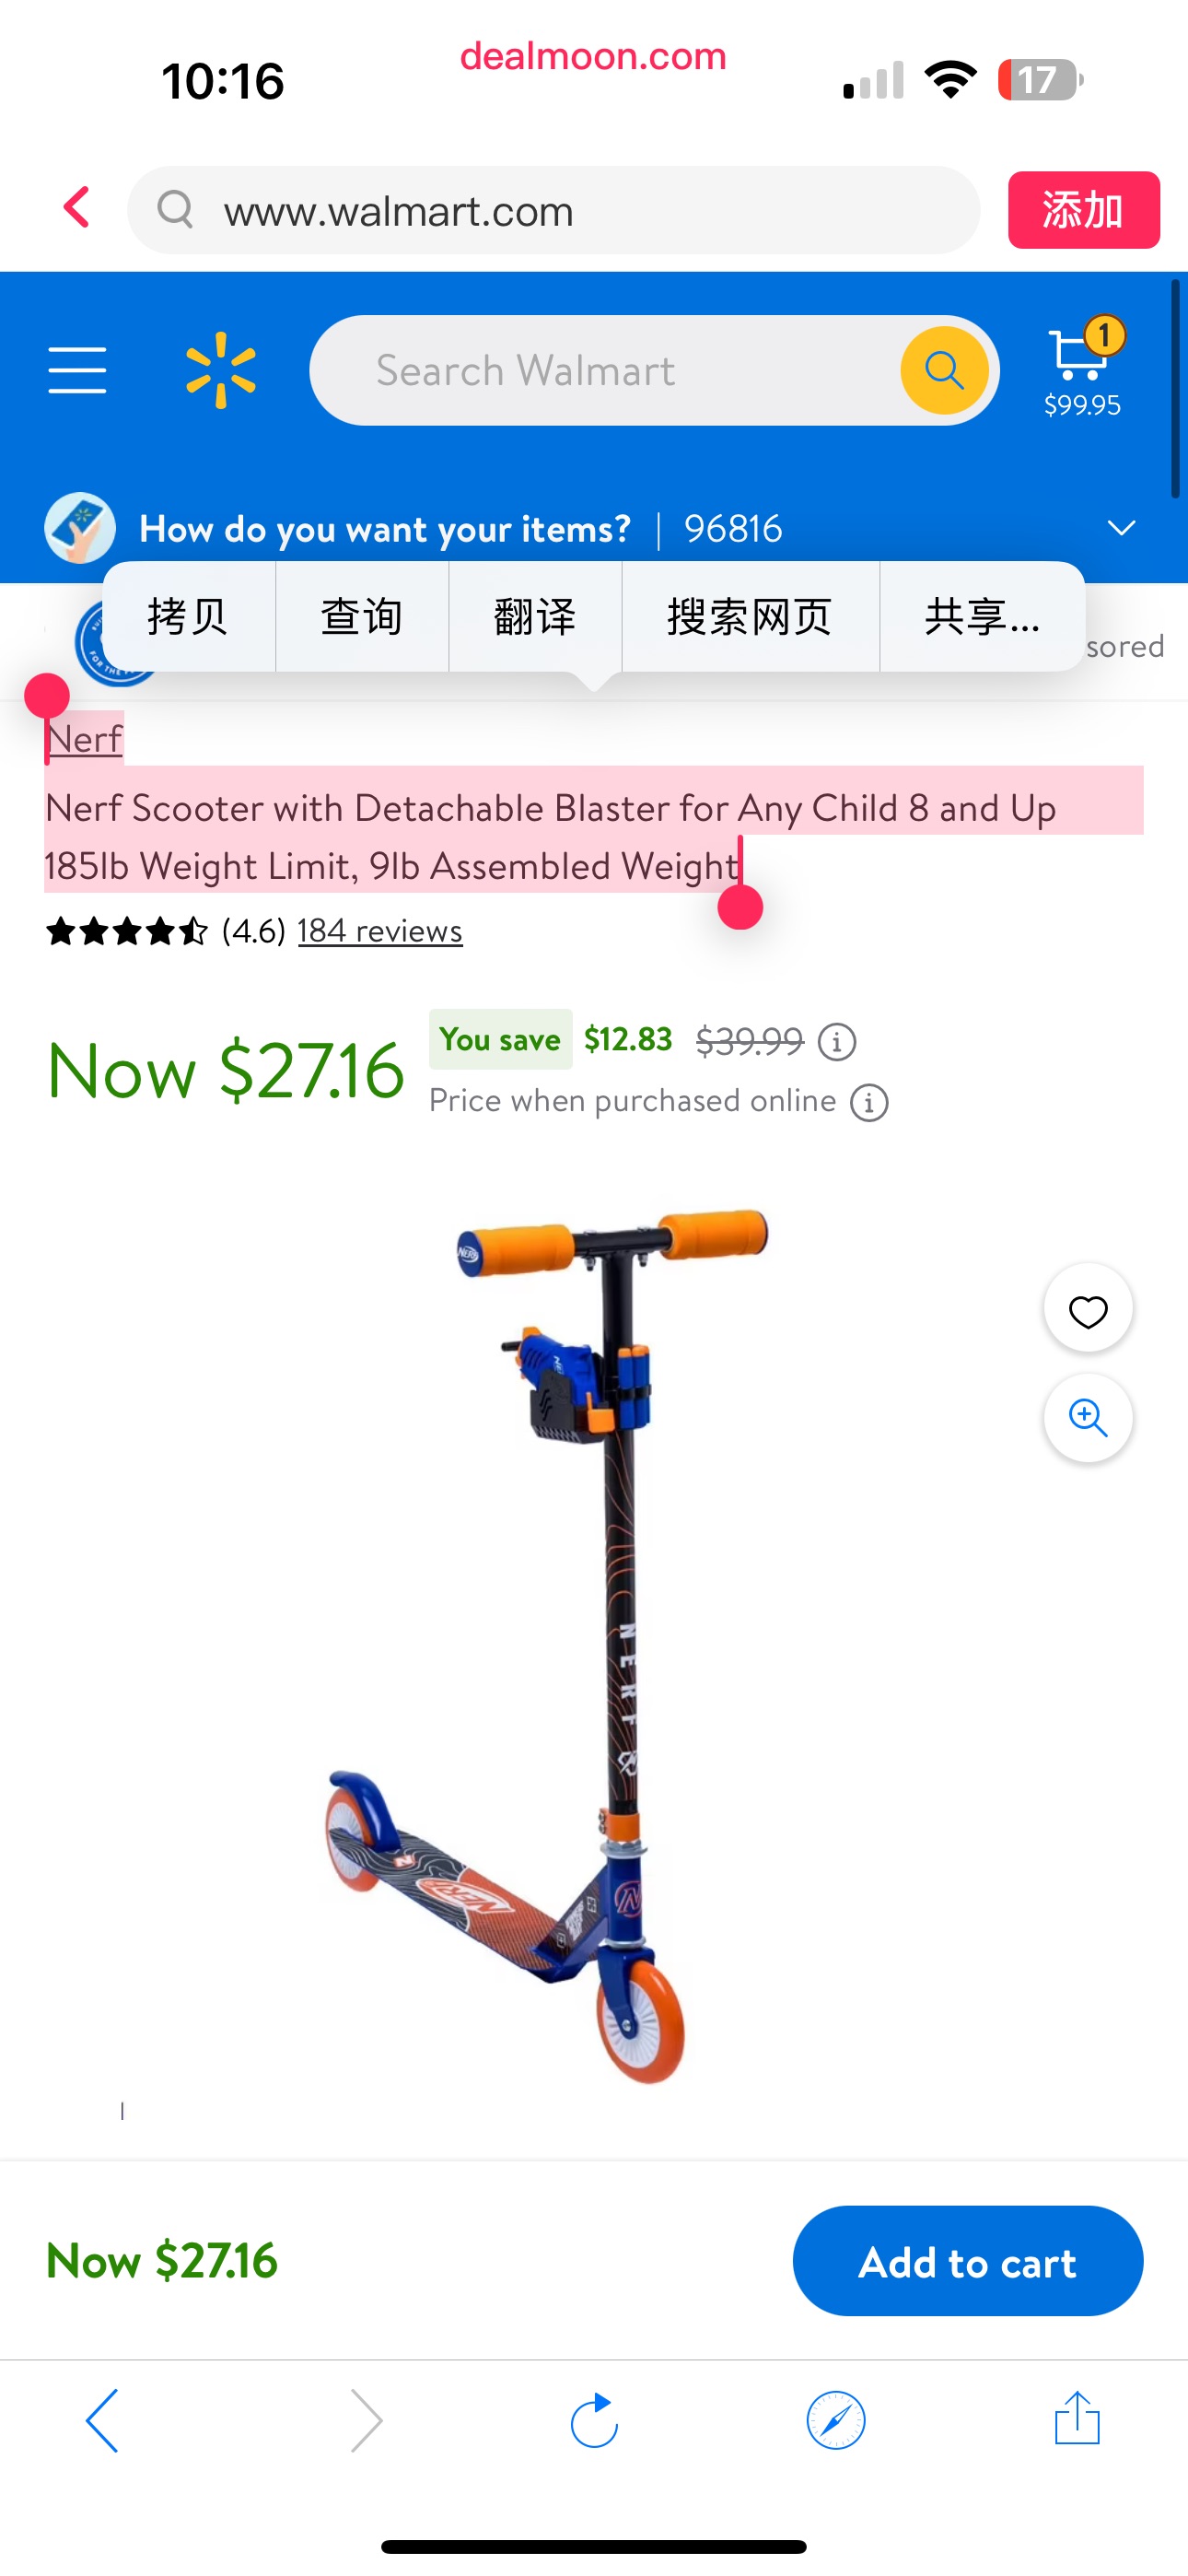 Nerf
Nerf Scooter with Detachable Blaster for Any Child 8 and Up 185lb Weight Limit, 9lb Assembled Weight滑板车